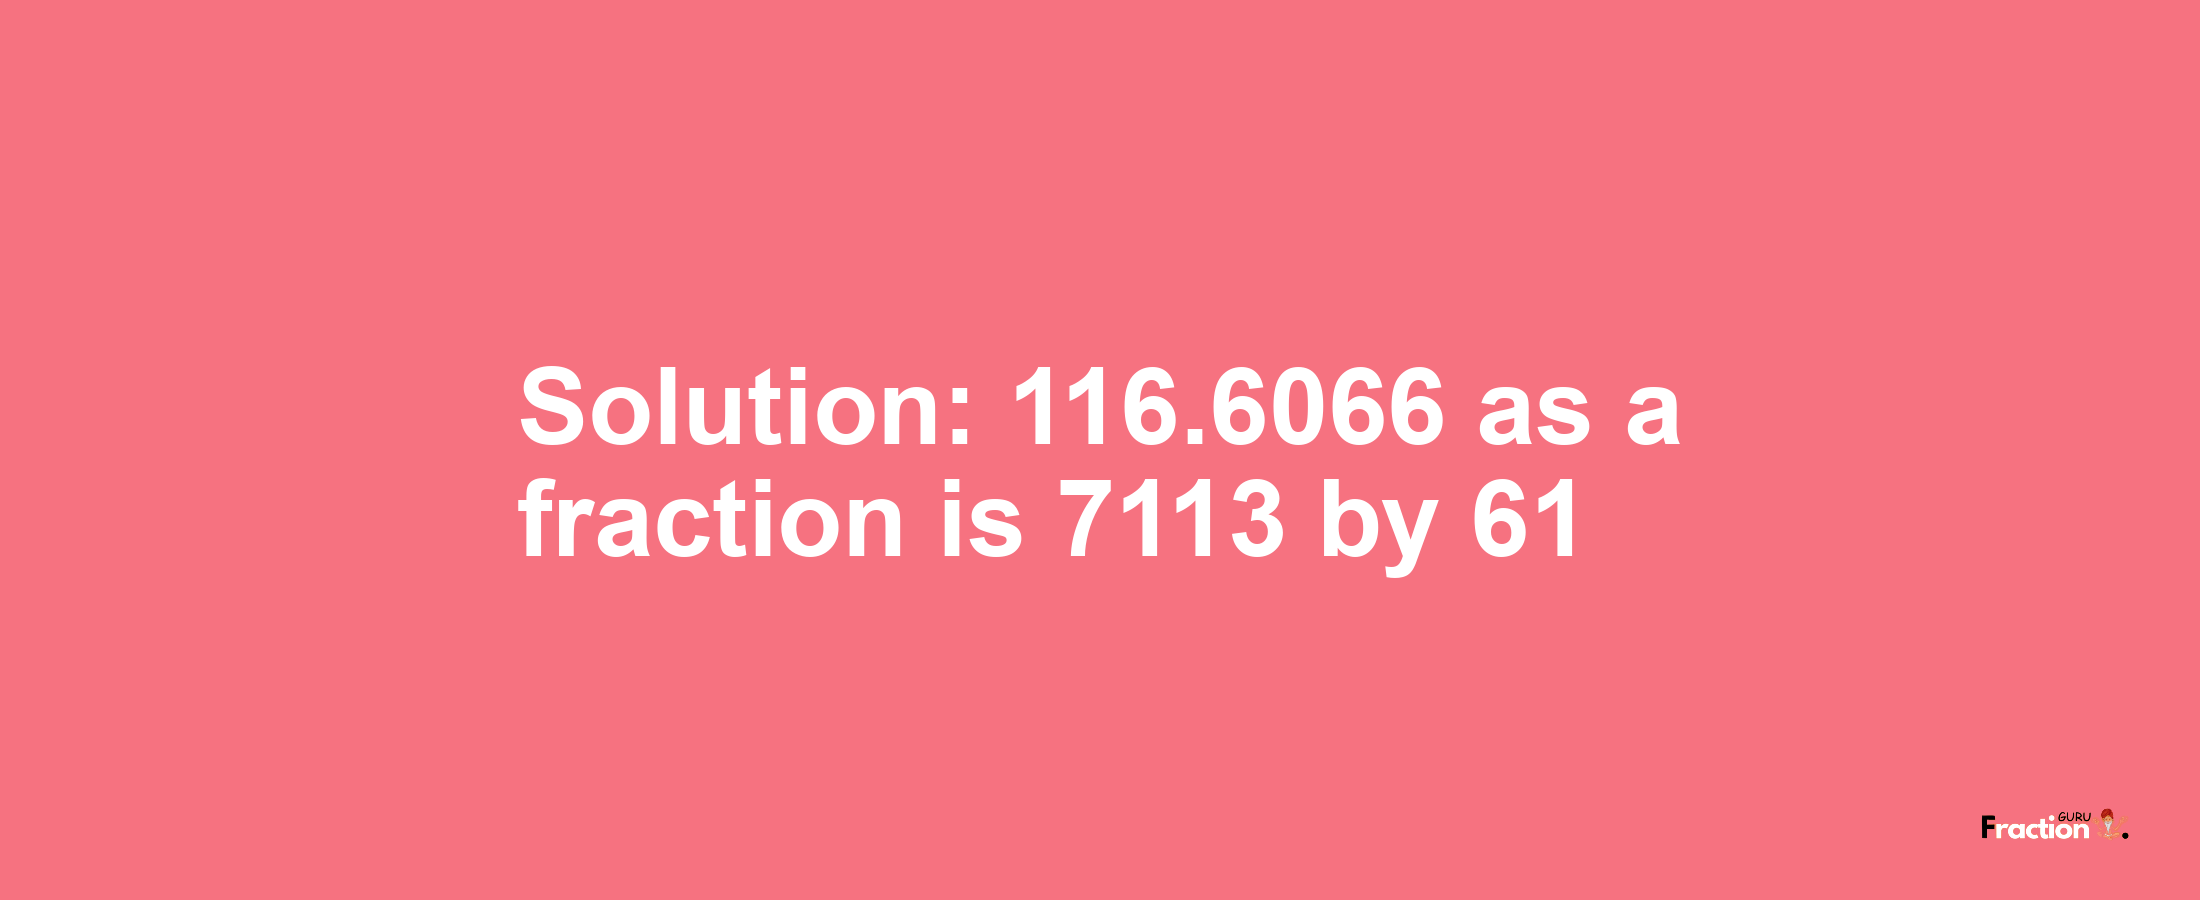 Solution:116.6066 as a fraction is 7113/61